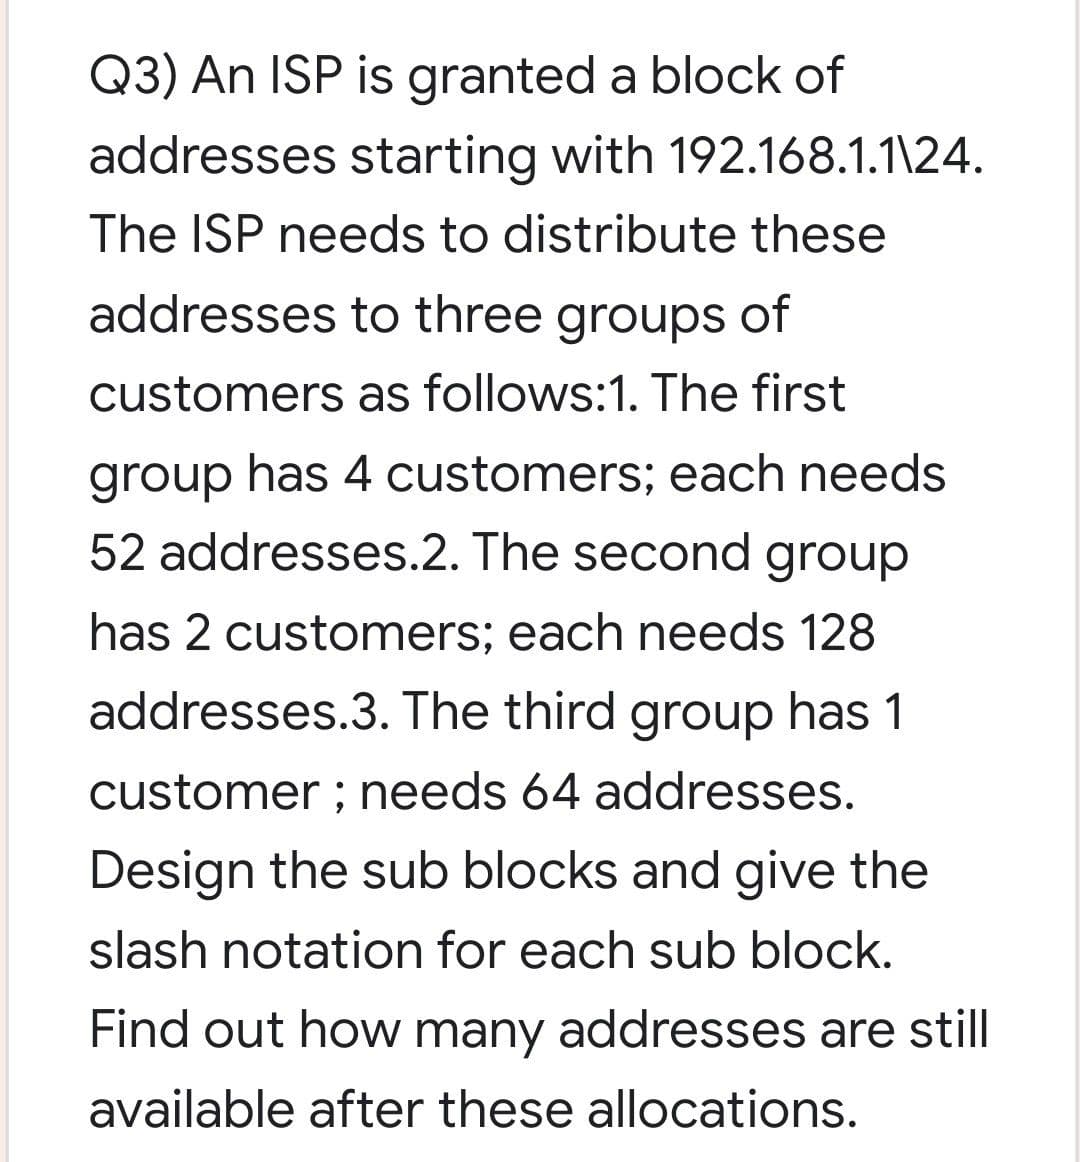 Q3) An ISP is granted a block of
addresses starting with 192.168.1.1\24.
The ISP needs to distribute these
addresses to three groups of
customers as follows:1. The first
group has 4 customers; each needs
52 addresses.2. The second group
has 2 customers; each needs 128
addresses.3. The third group has 1
customer ; needs 64 addresses.
Design the sub blocks and give the
slash notation for each sub block.
Find out how many addresses are still
available after these allocations.
